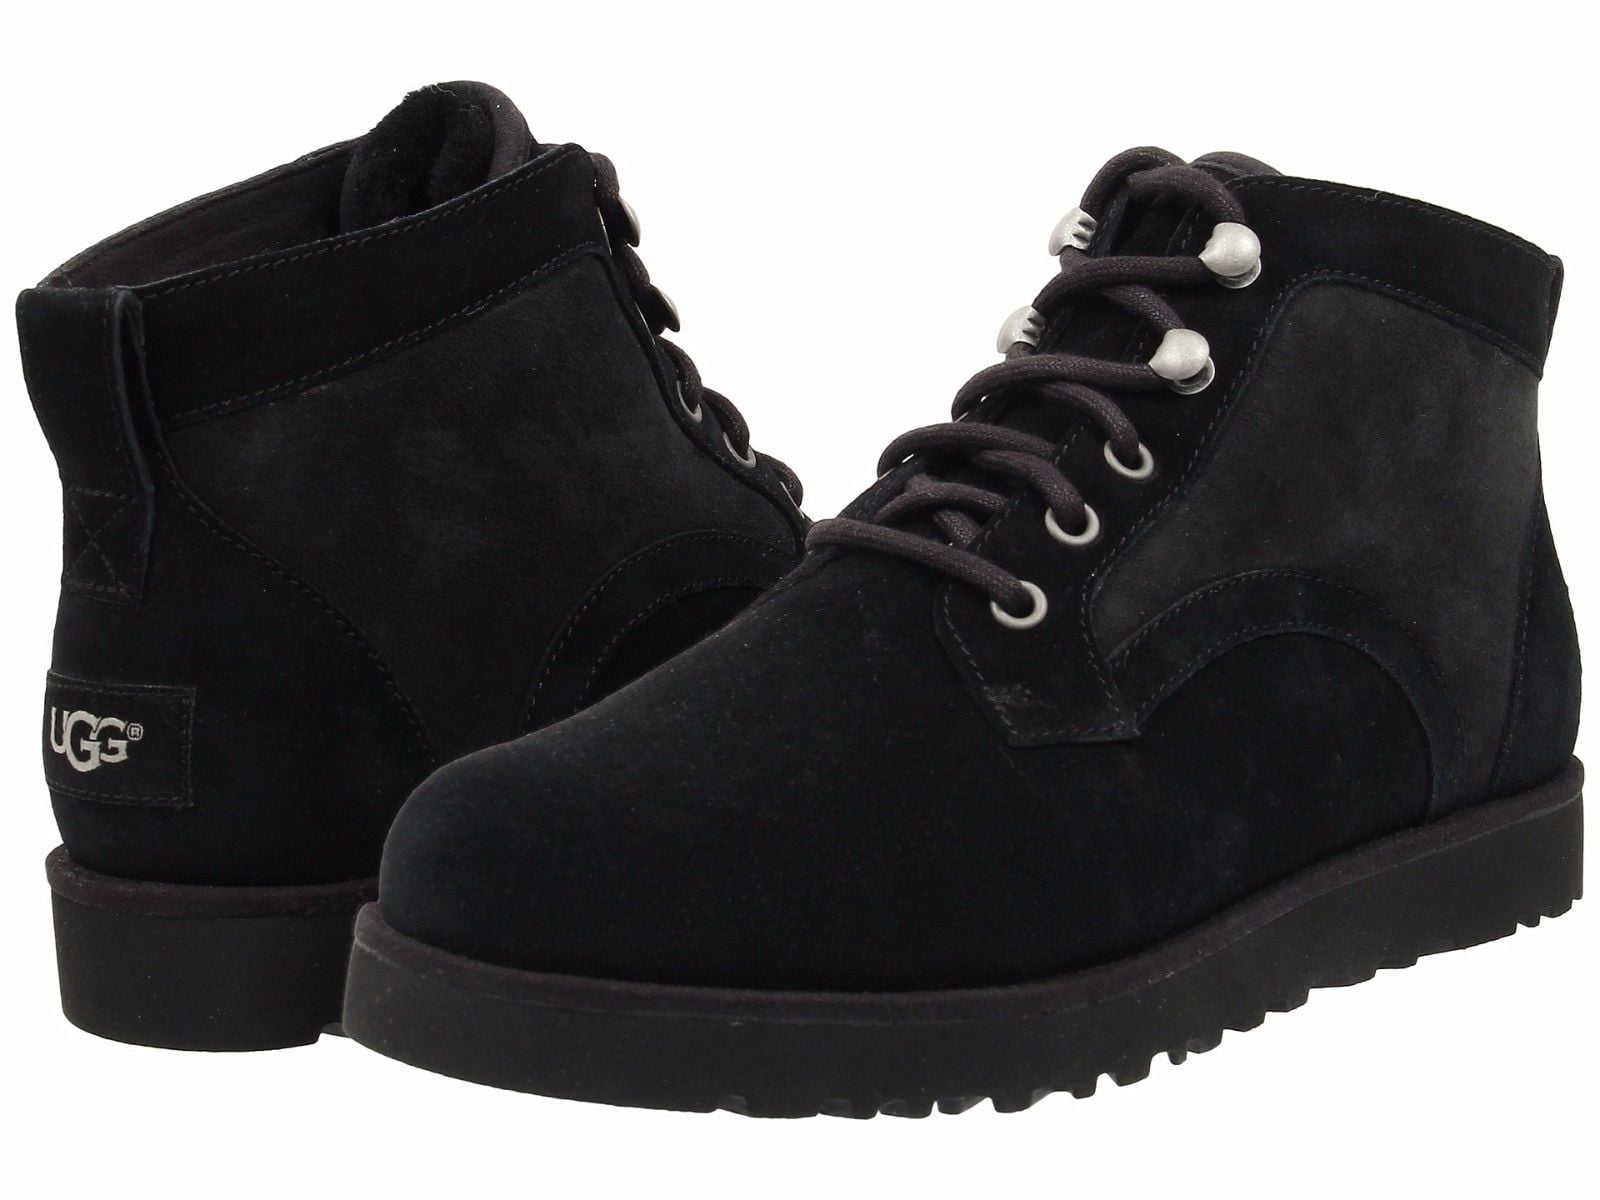 UGG Women's Bethany Lace Up Suede Booties 1012532 - Walmart